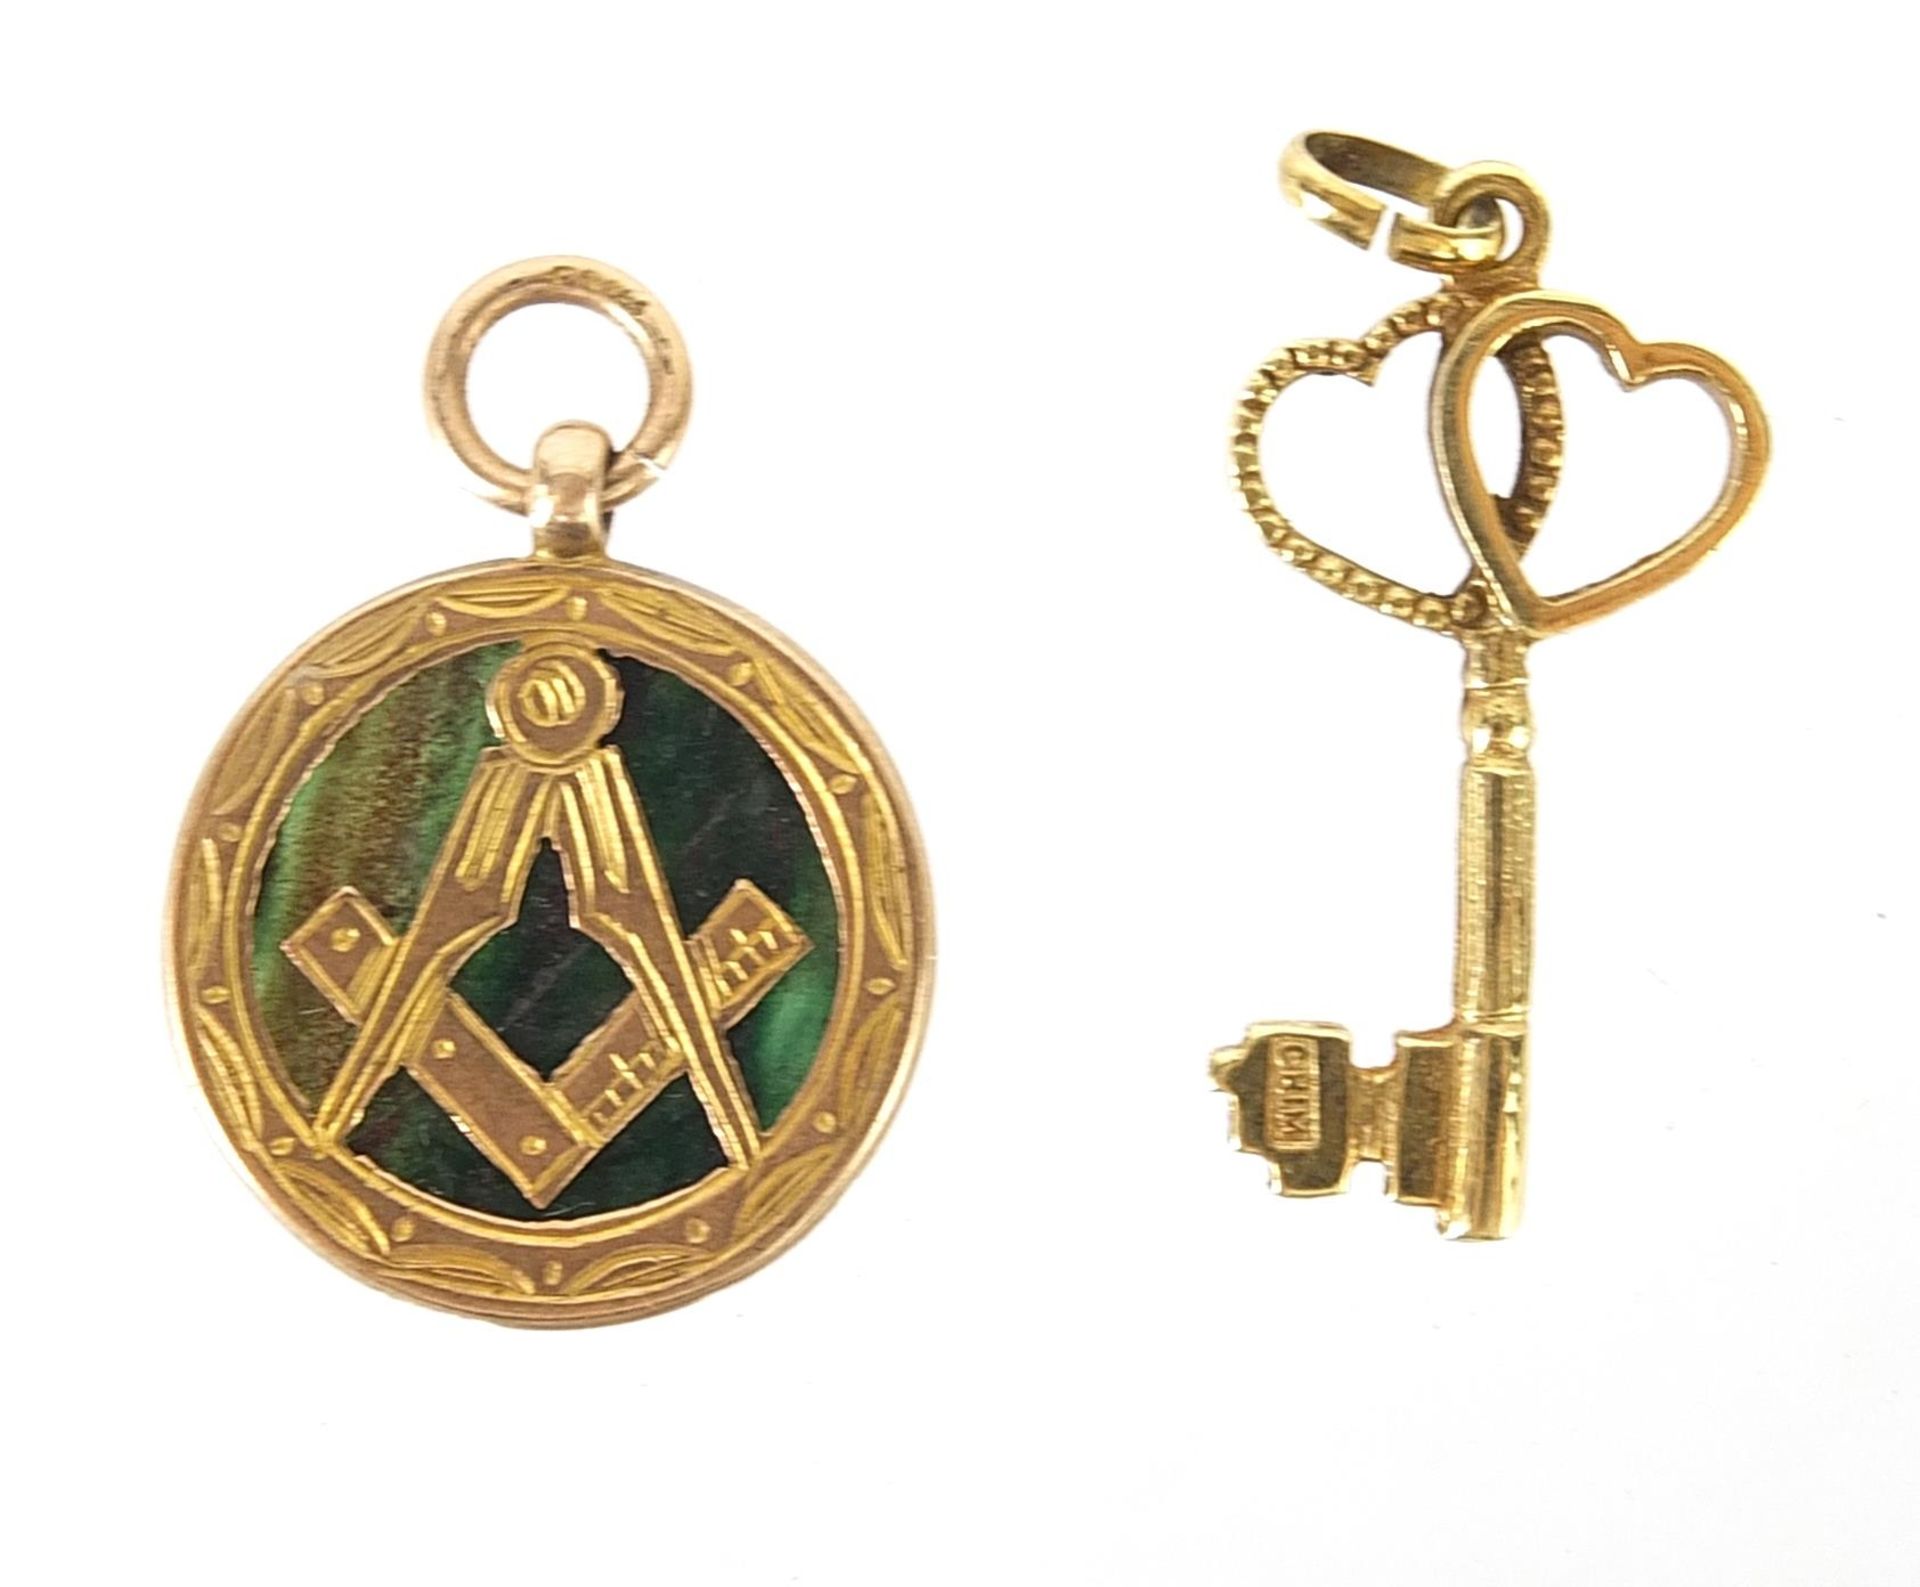 9ct gold hardstone masonic pendant and a 9ct gold love heart key pendant, 2.5cm and 2cm high,